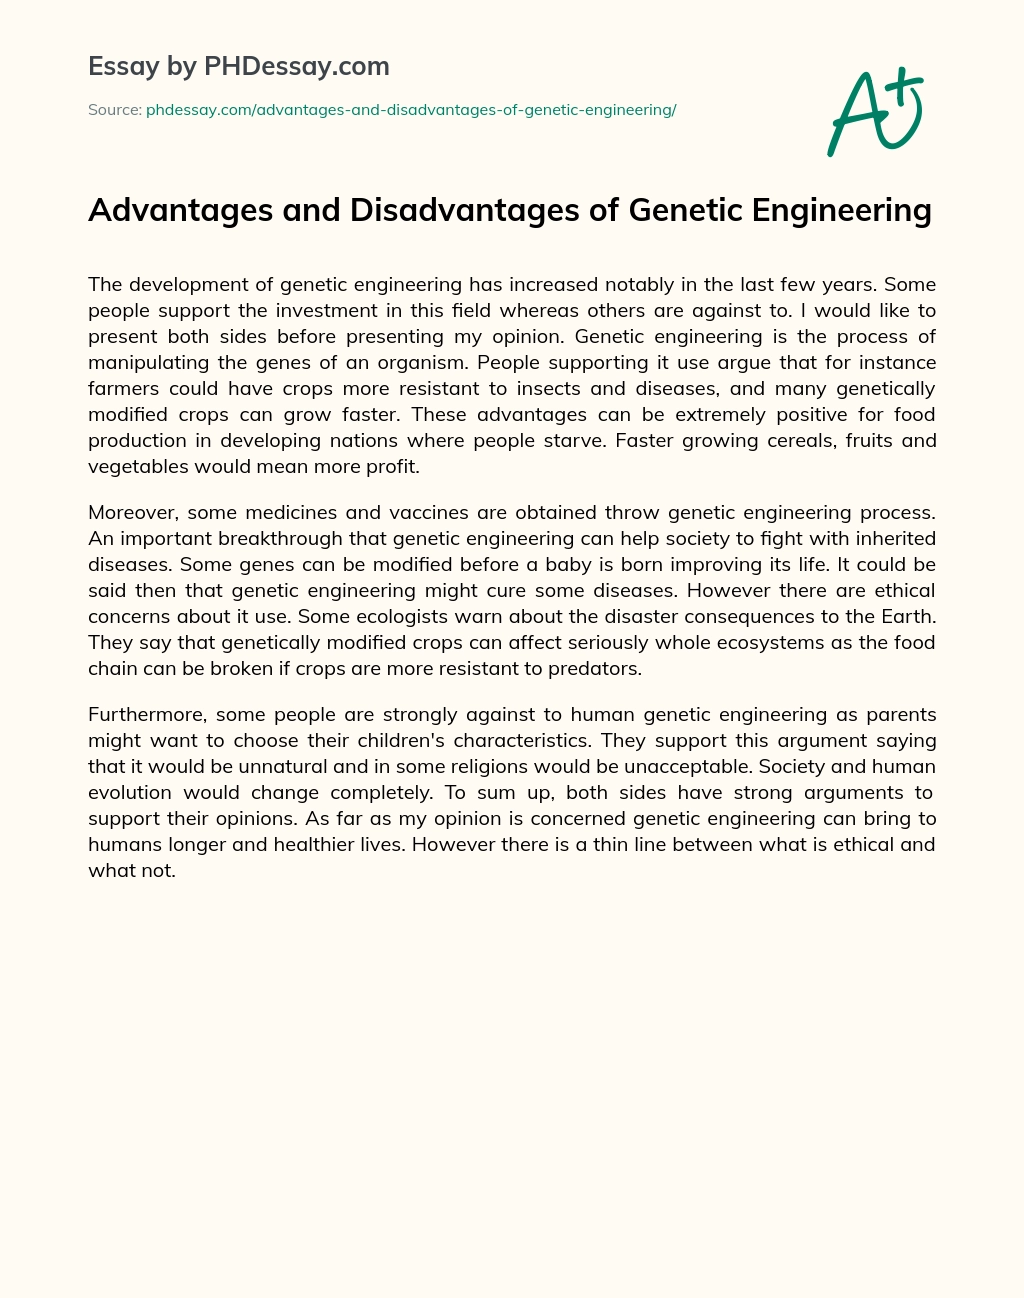 Advantages and Disadvantages of Genetic Engineering essay